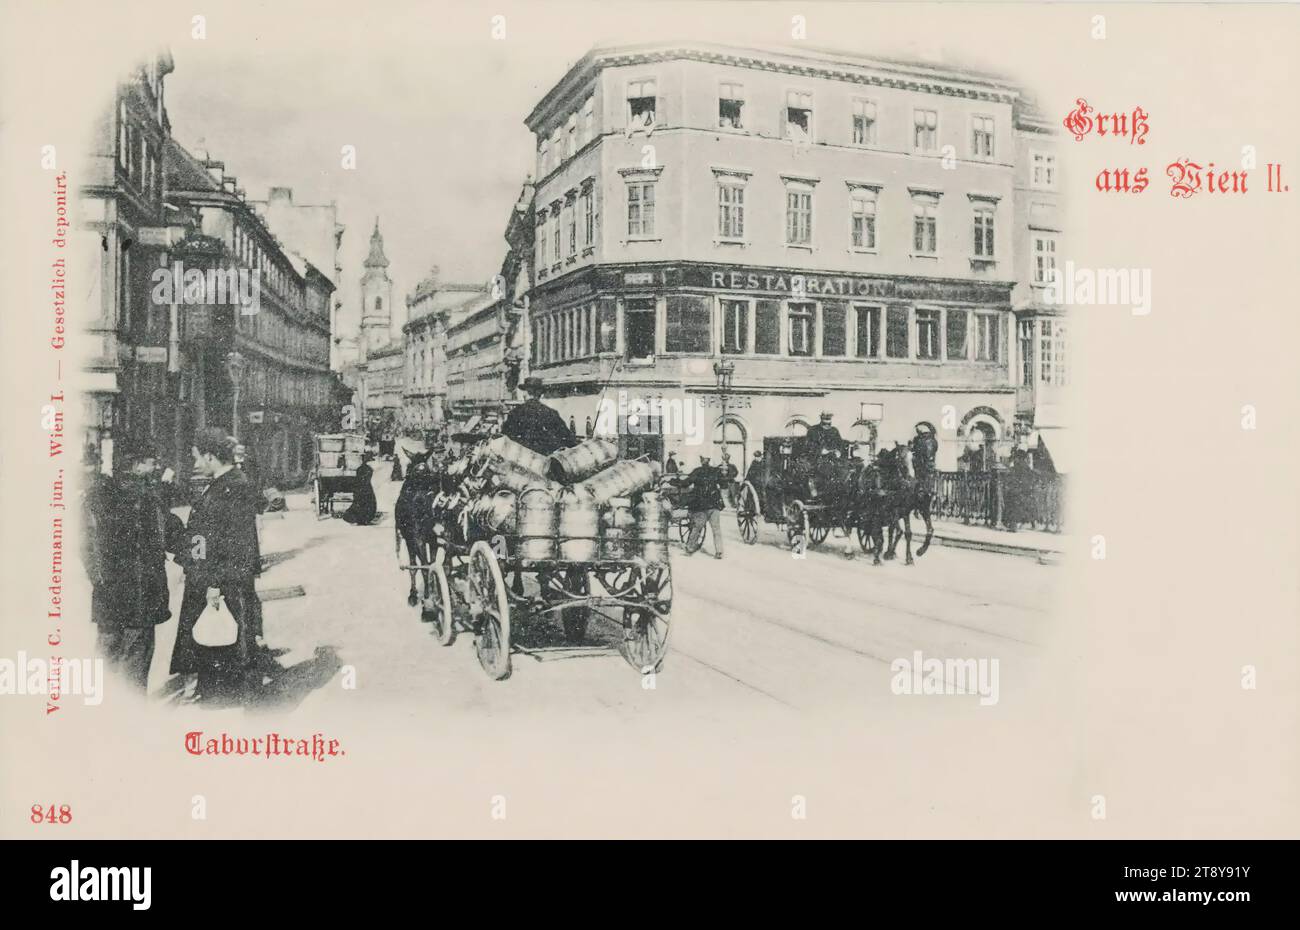 2, Taborstraße - view from Schwedenbrücke, picture postcard, Carl (Karl) Ledermann jun., maker, date about 1898, cardboard, collotype, 2nd district: Leopoldstadt, (farmer's) wagon, freight wagon, carriage, the usual house or row of houses, apartment house, tenement house, house with store, church (outside), with people, four-wheeled animal-drawn vehicle, ex: Droschke, carriage, wagon, street, Taborstrasse, The Vienna Collection Stock Photo